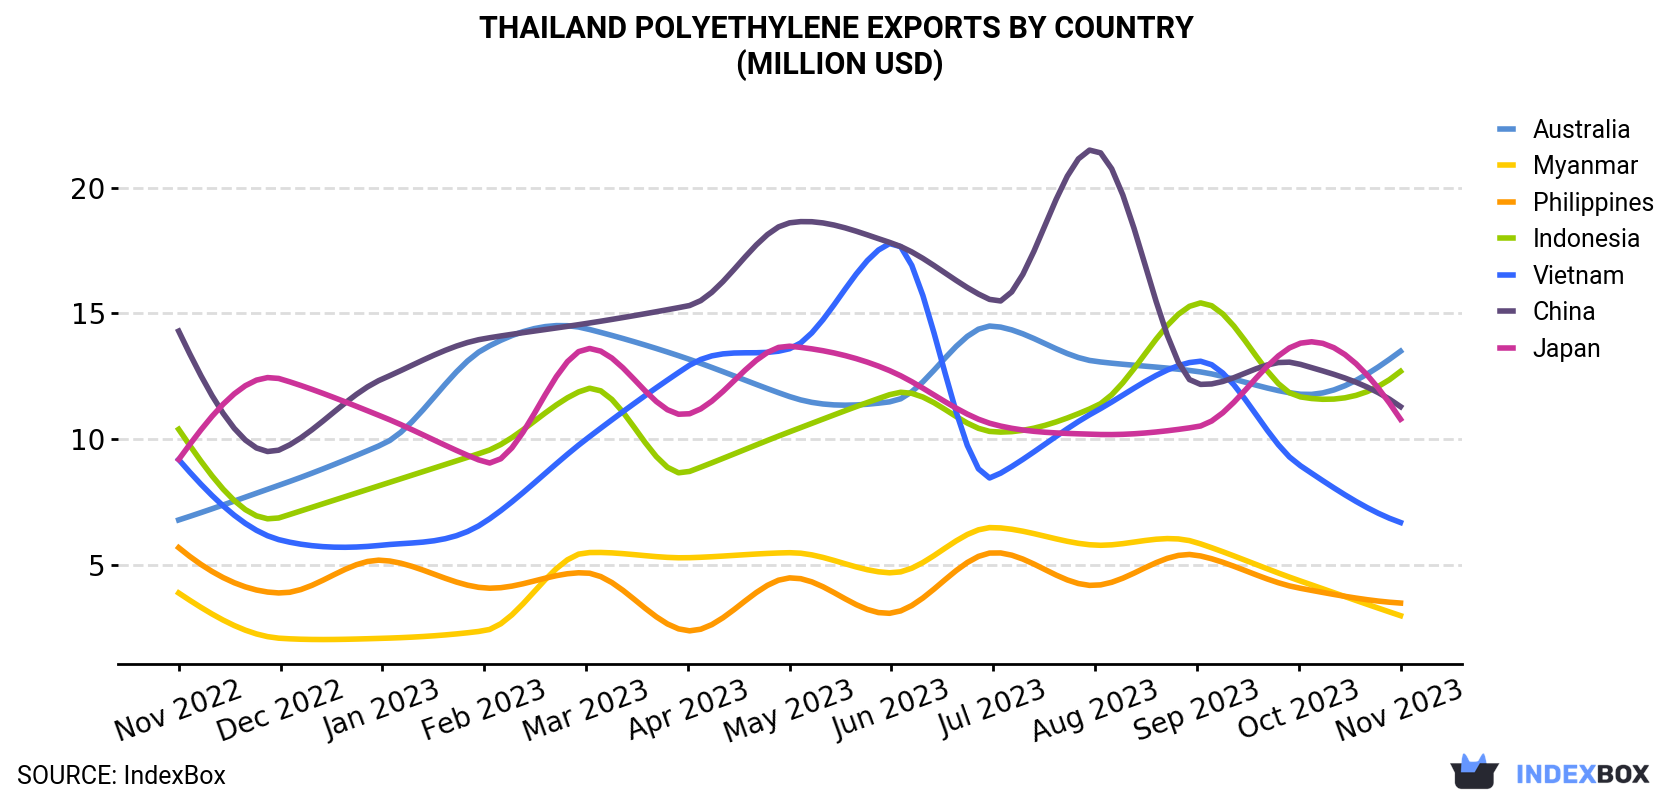 Thailand Polyethylene Exports By Country (Million USD)